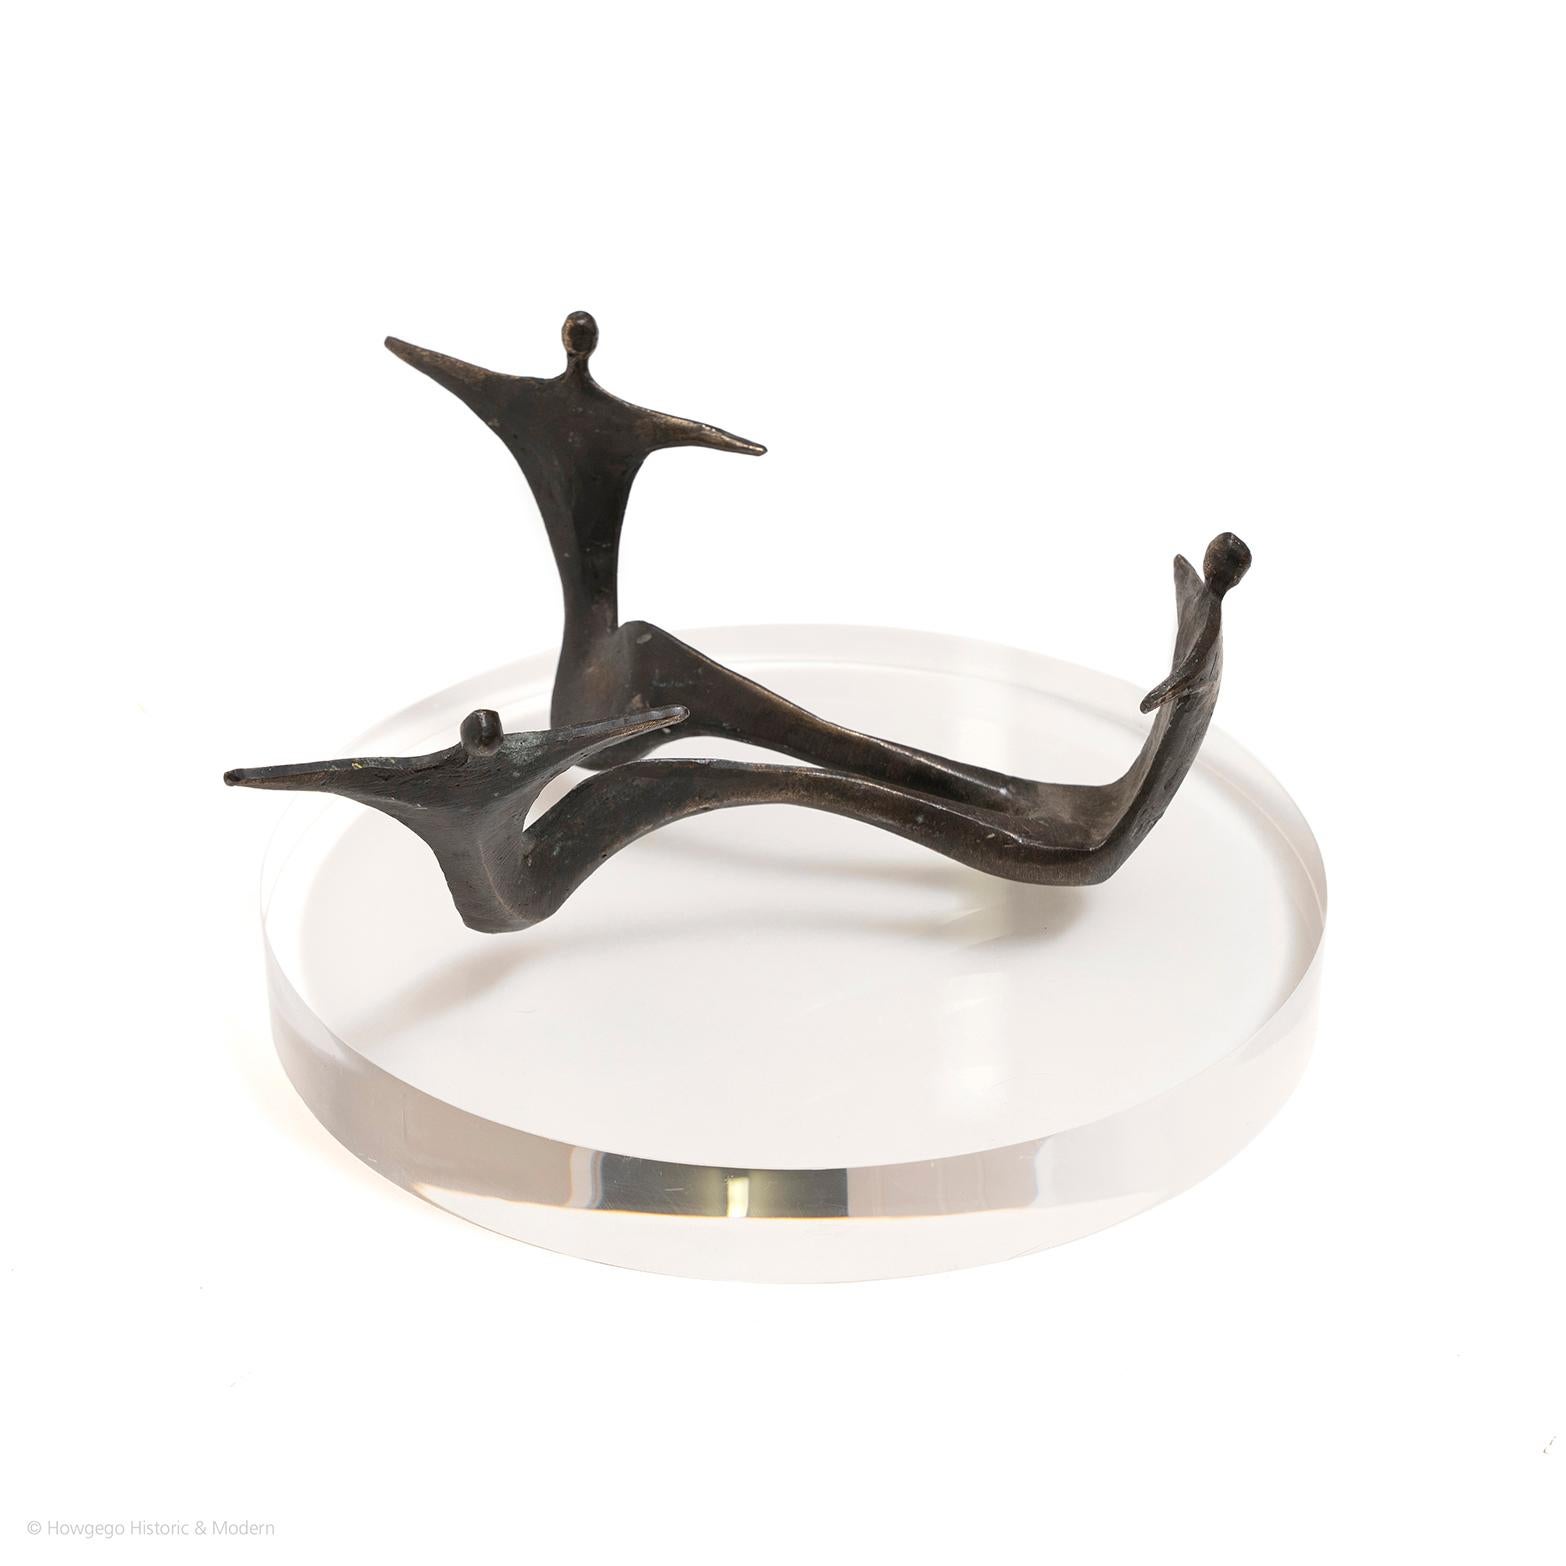 The distinctive pared down, forms of the three dancers as one entity creates a rhythmic fluidity in the composition and representing balance and unity. 

A modernist, biomorphic, bronze sculpture of three dancers as one form, legs intertwined